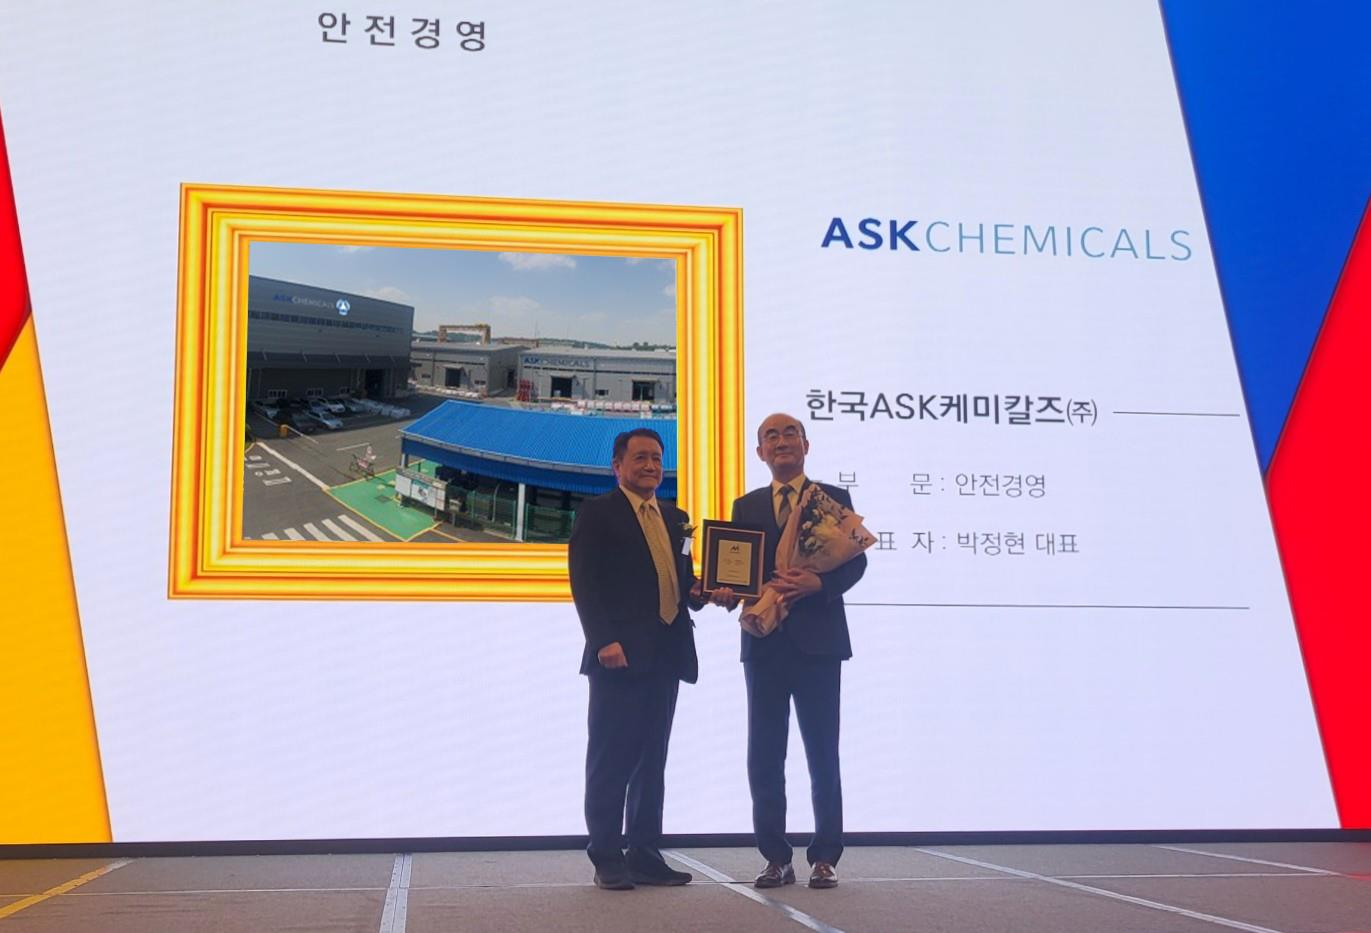 ASK Chemicals Korea is Awarded with National Industry Award for Exceptional Safety Management and Commitment to ESG Principles